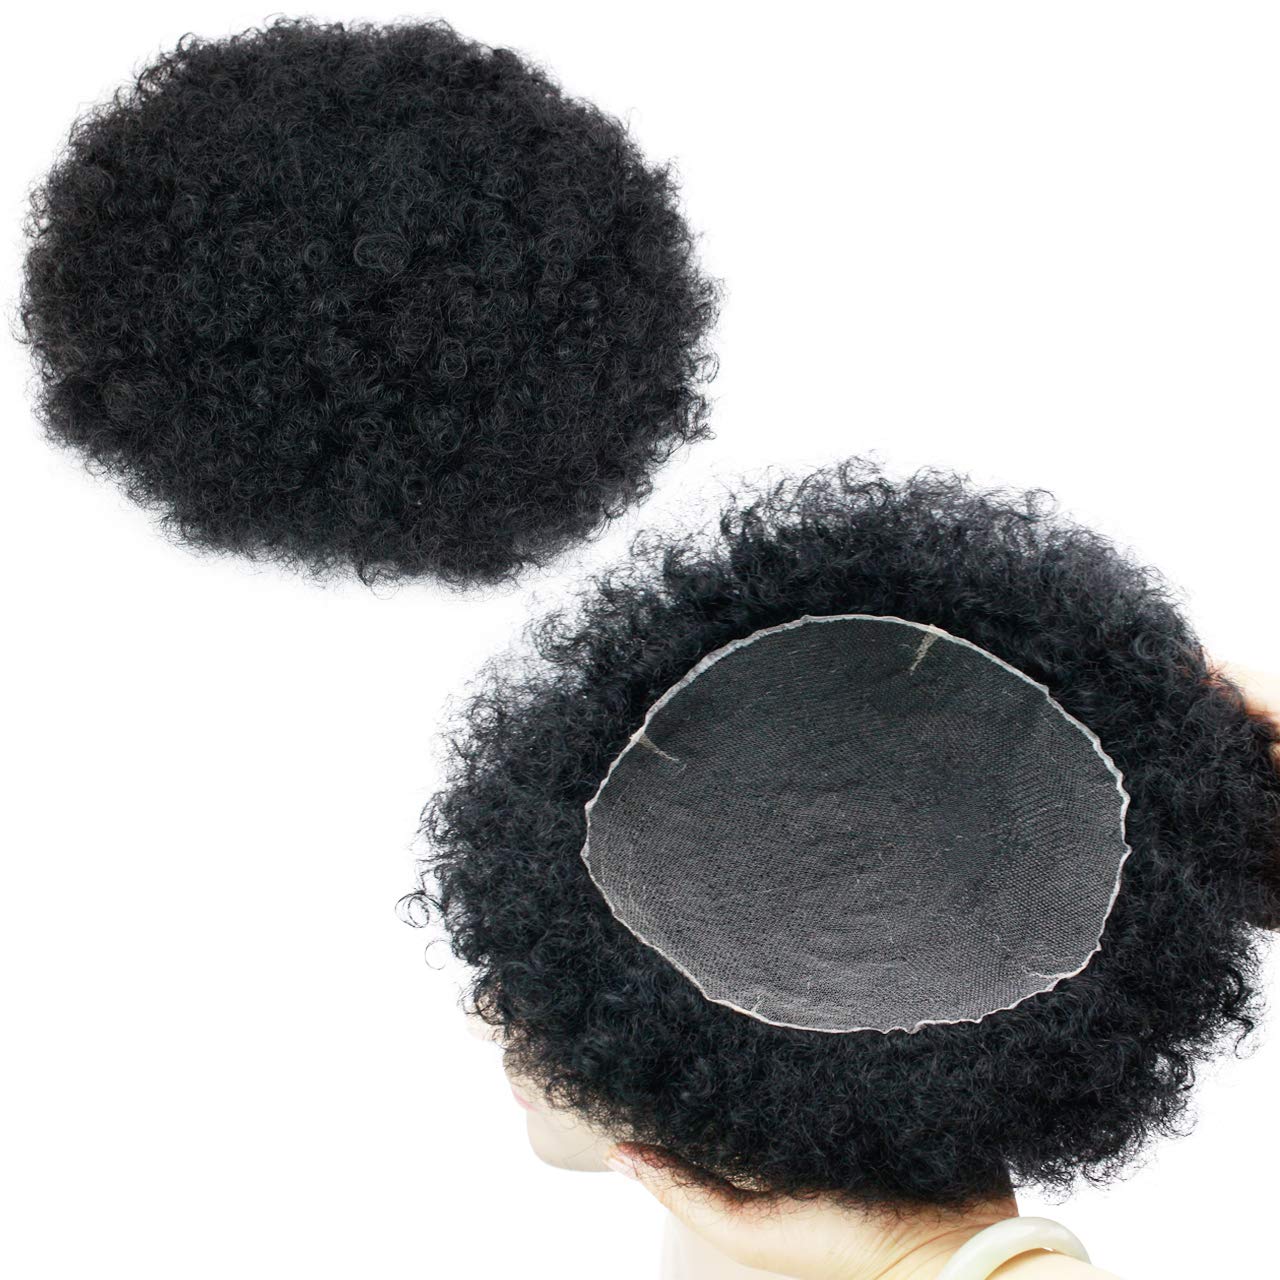 Afro Curly Toupee PU Base 10×8 inch 4mm Curly Human Hair Toupee Men ...